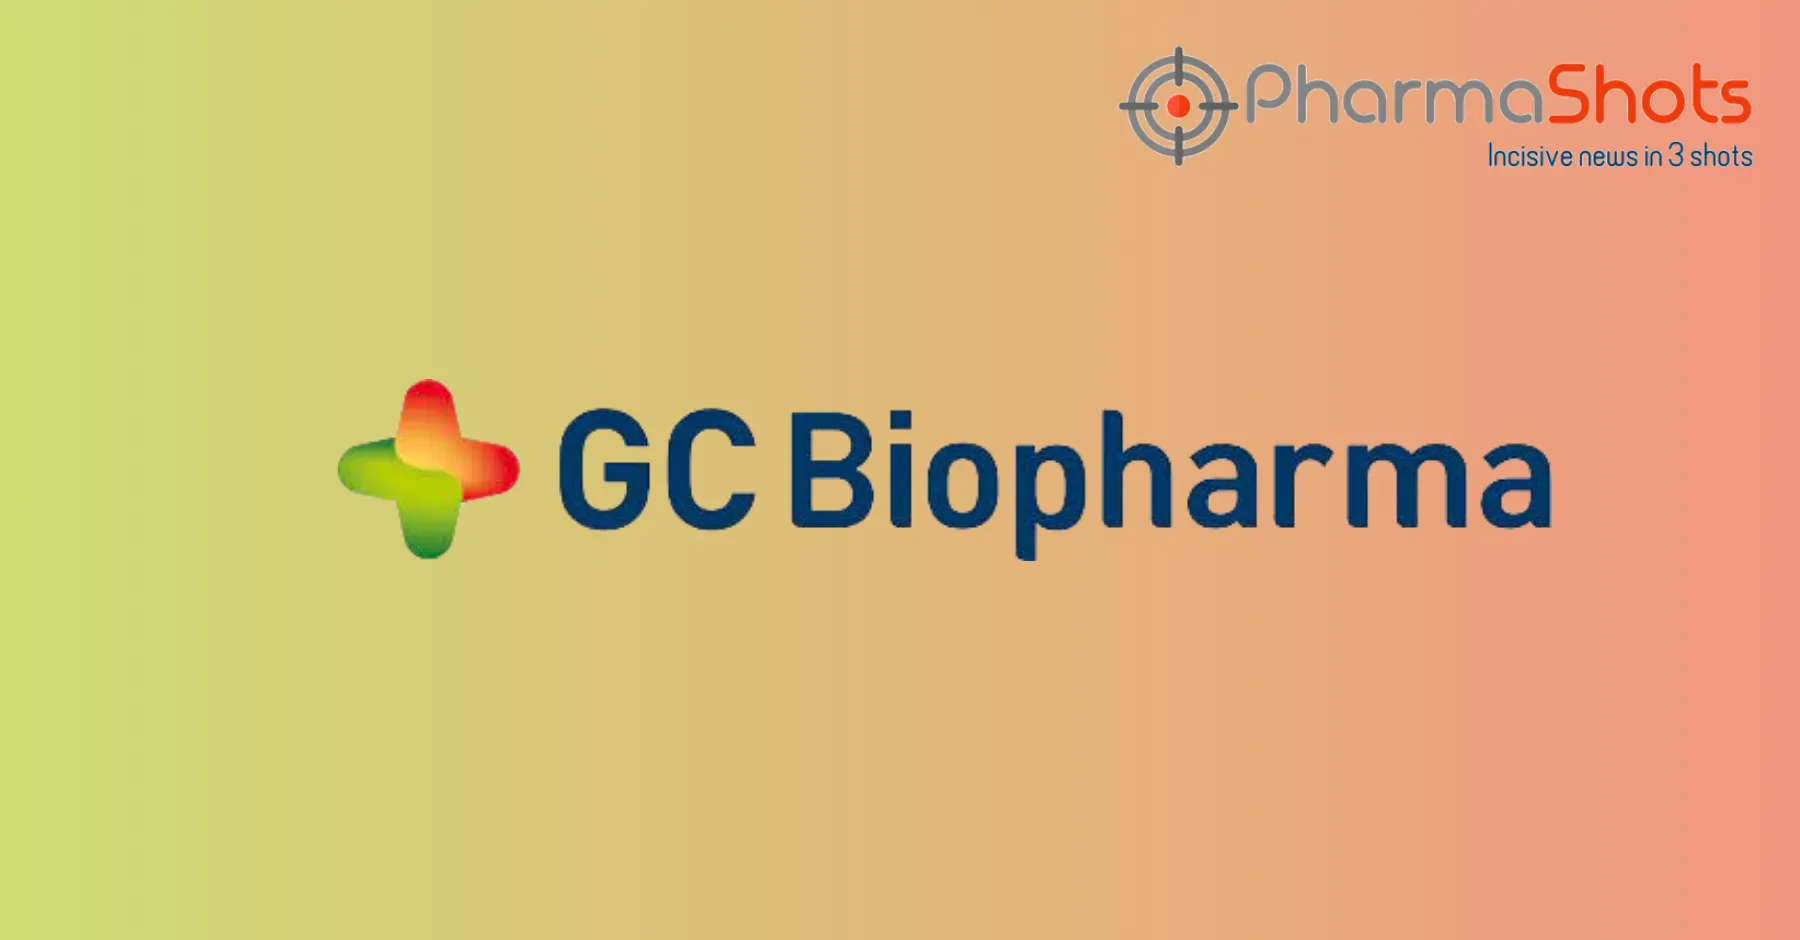 GC Biopharma Receives the US FDA Approval for Alyglo (GC5107B),10% Liquid for the treatment of Primary Humoral Immunodeficiency (PI)